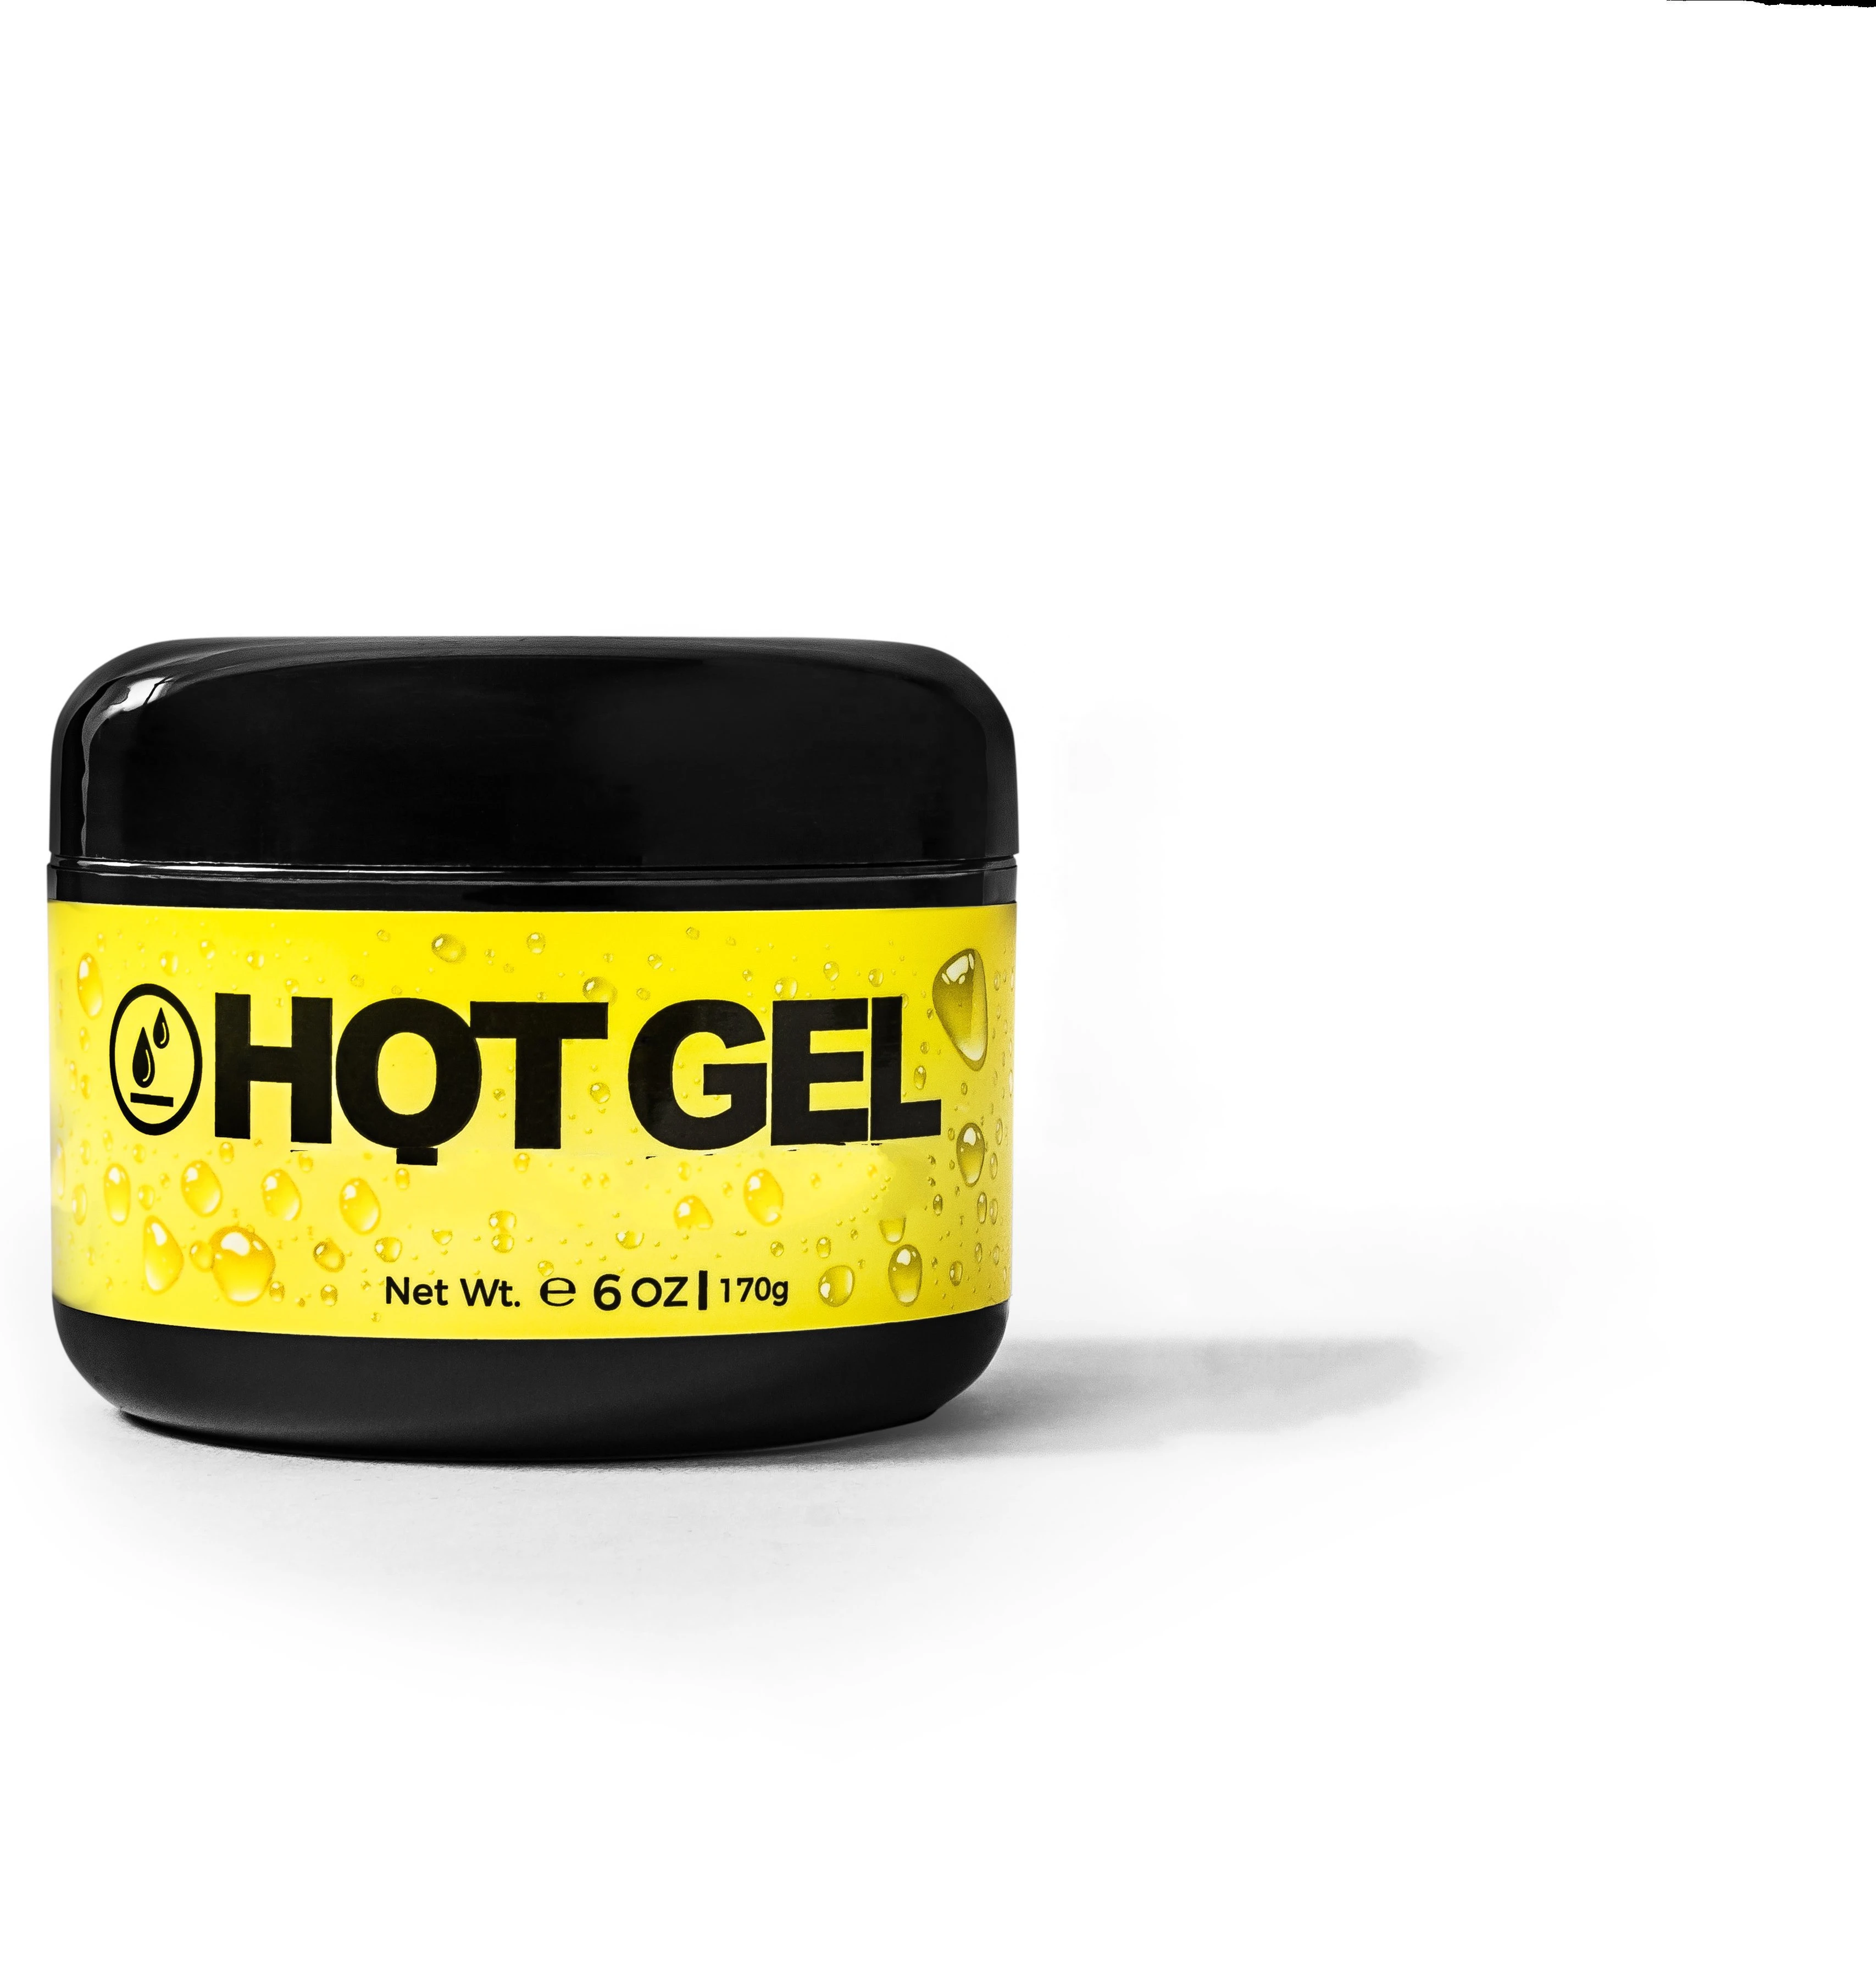 Private Label Hot Slimming Gel, Slimming Body Cream with Caffeine